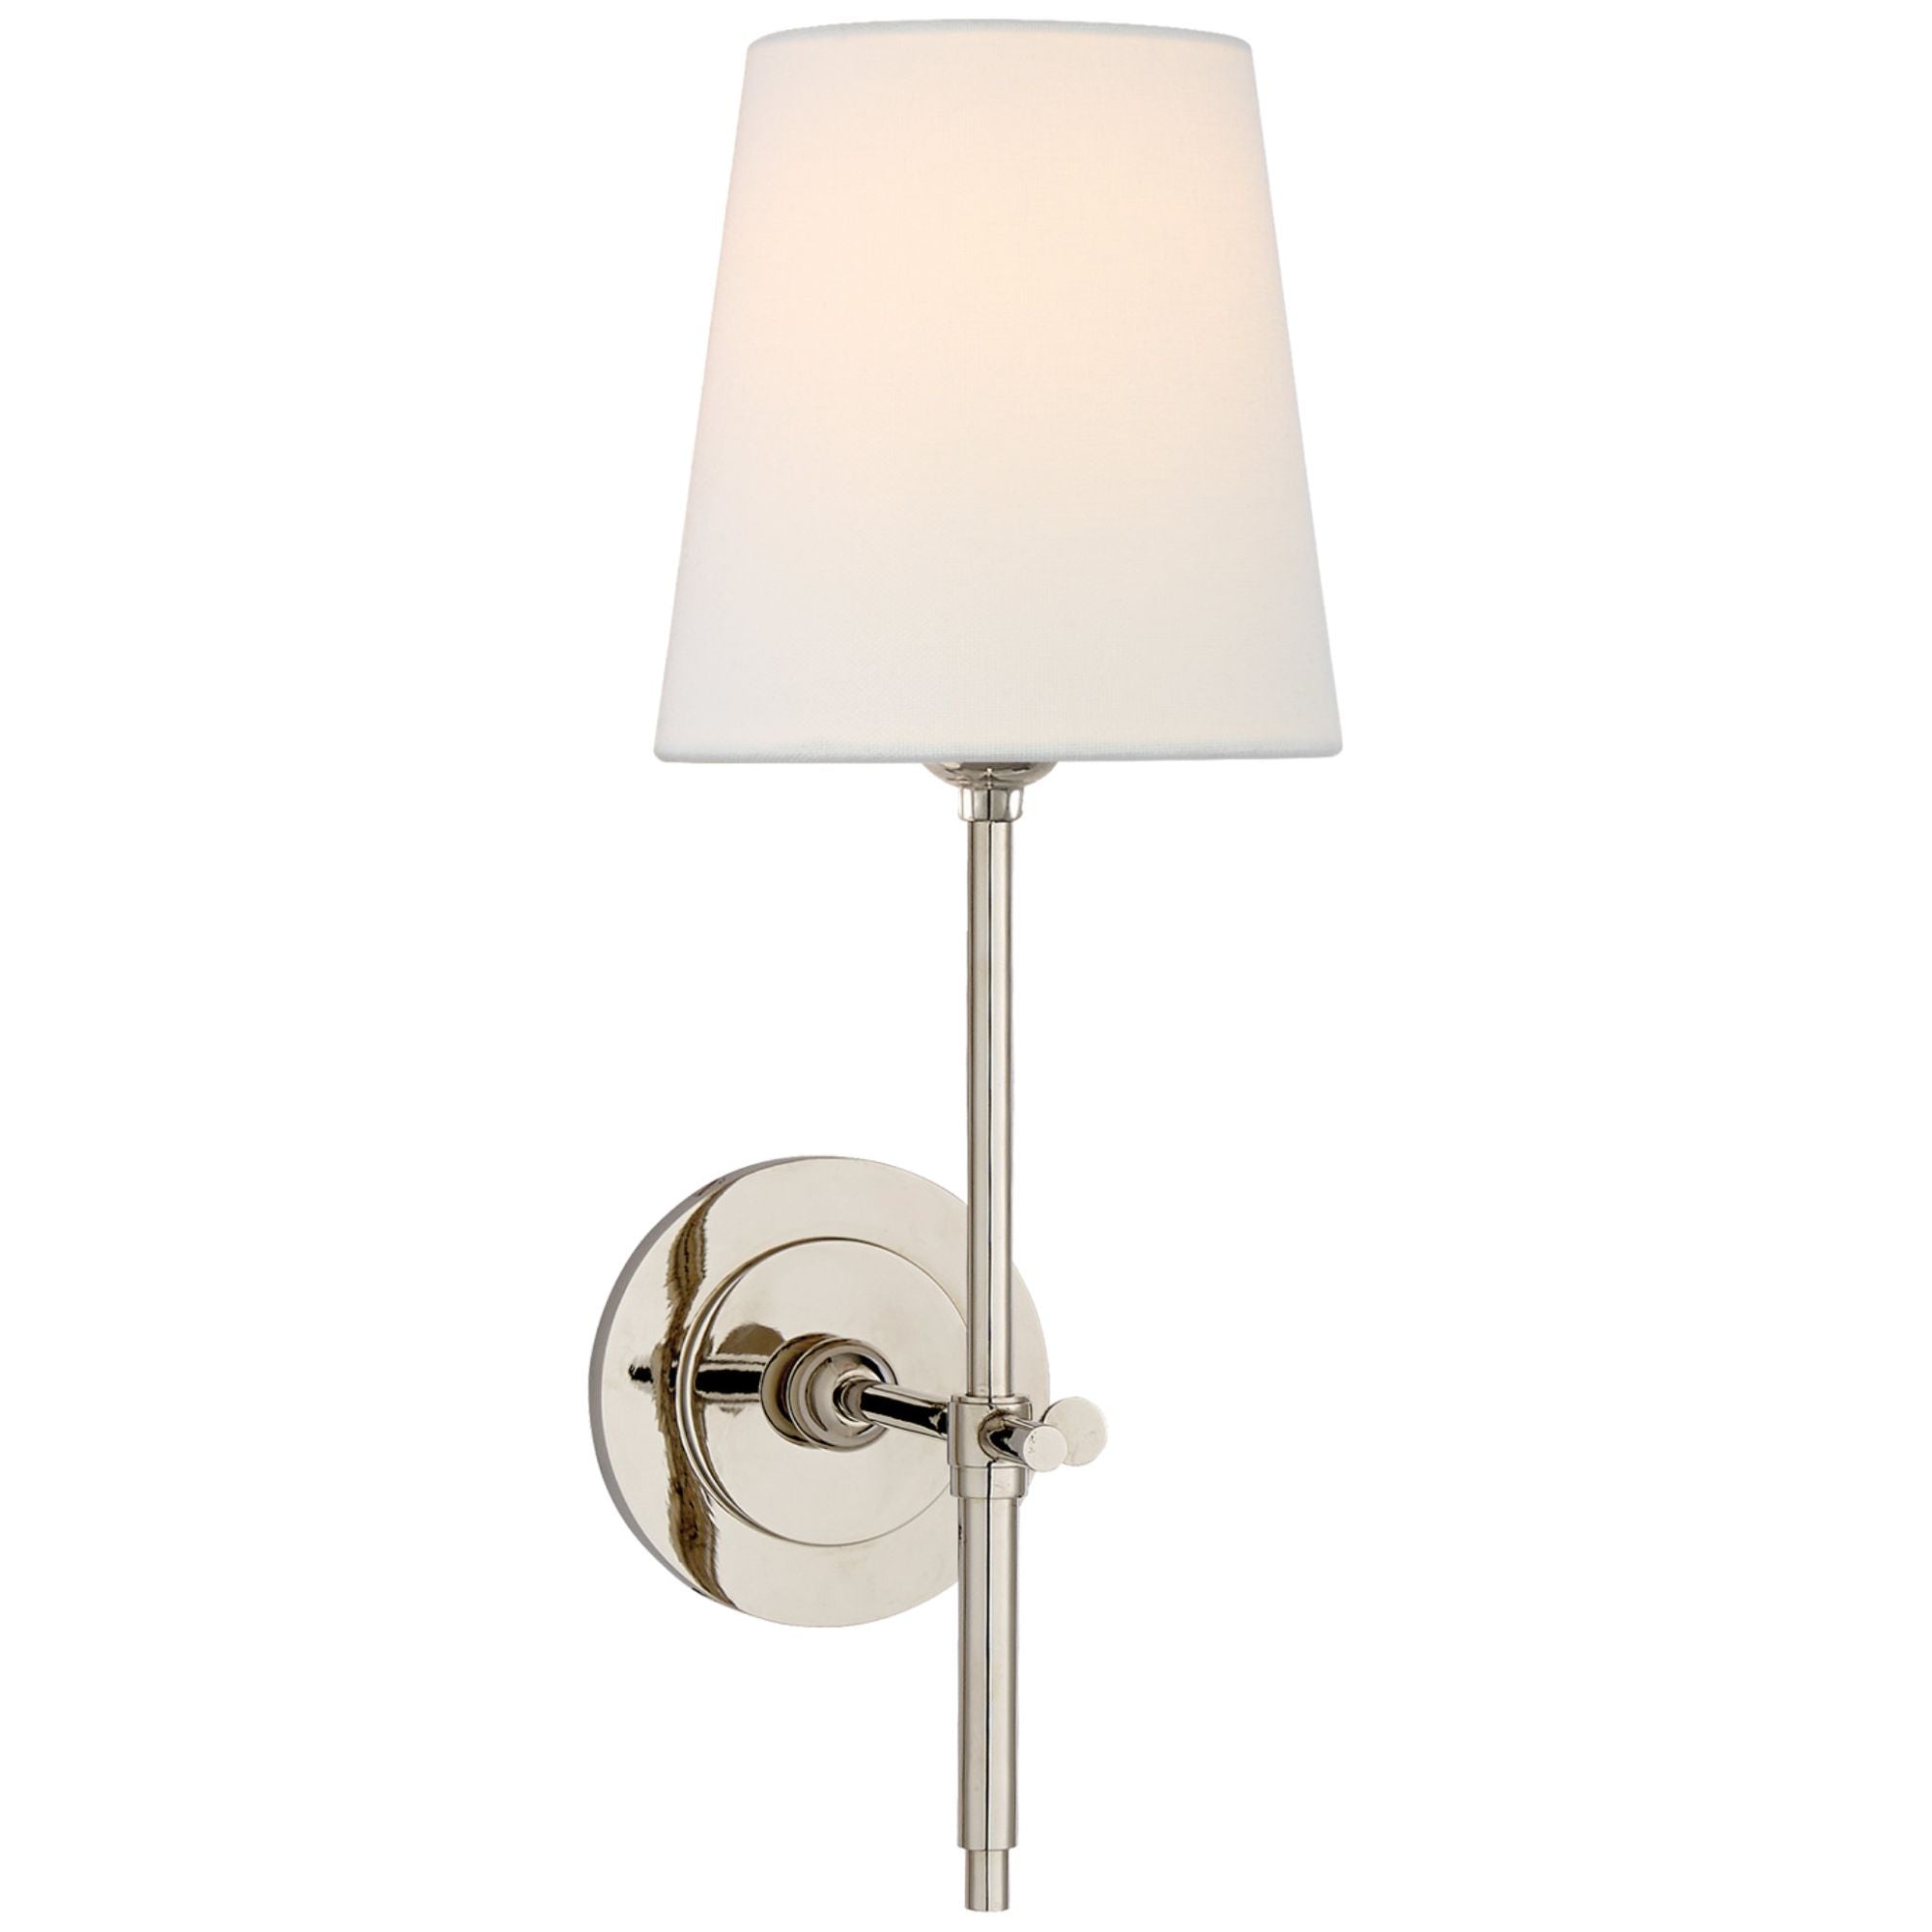 Thomas O'Brien Bryant Sconce in Polished Nickel with Linen Shade